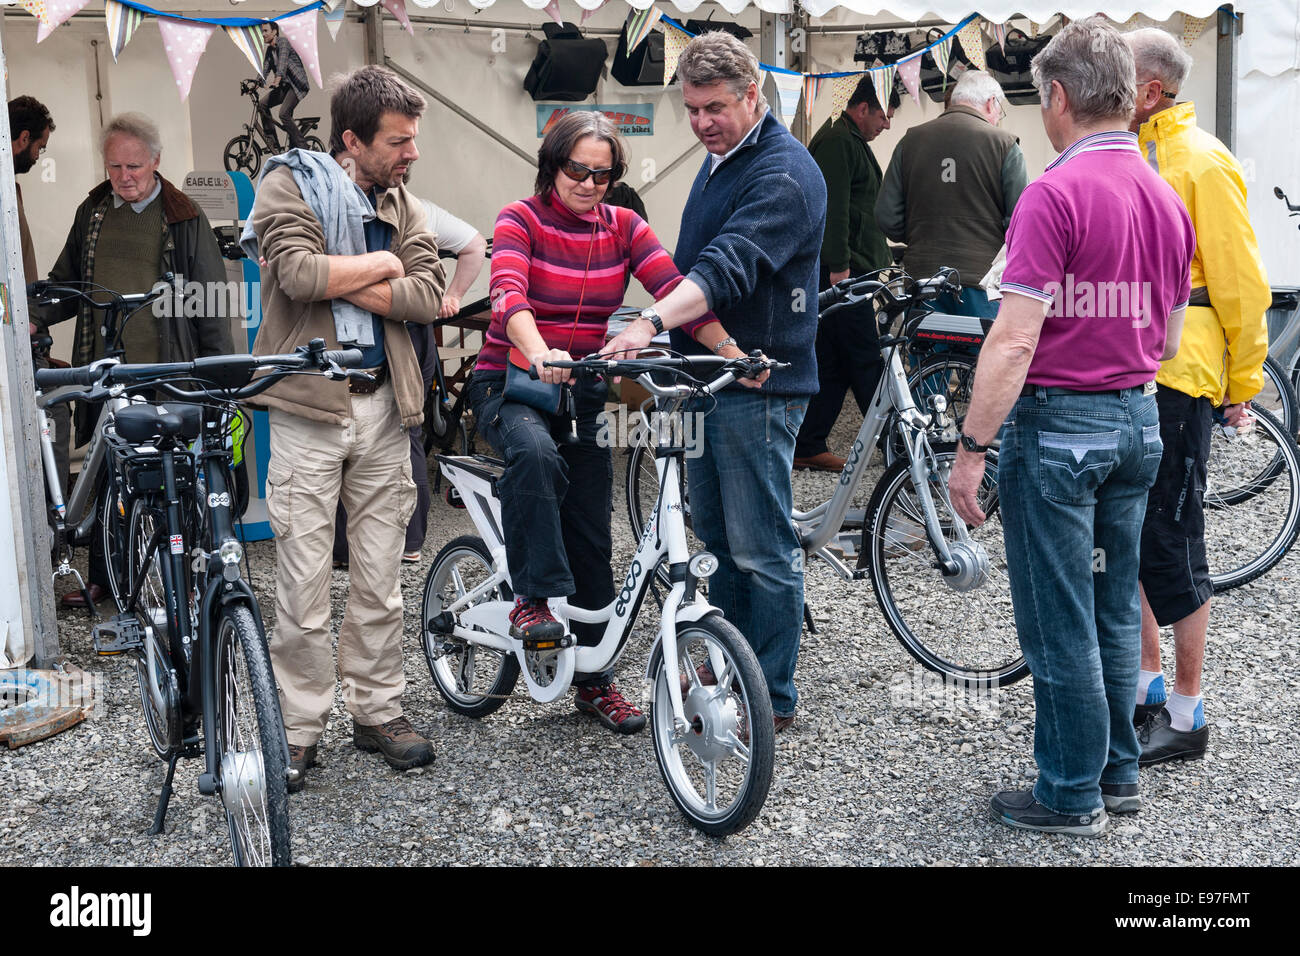 Presteigne, Powys, UK. Interested visitors trying out electric bikes at a trade show Stock Photo